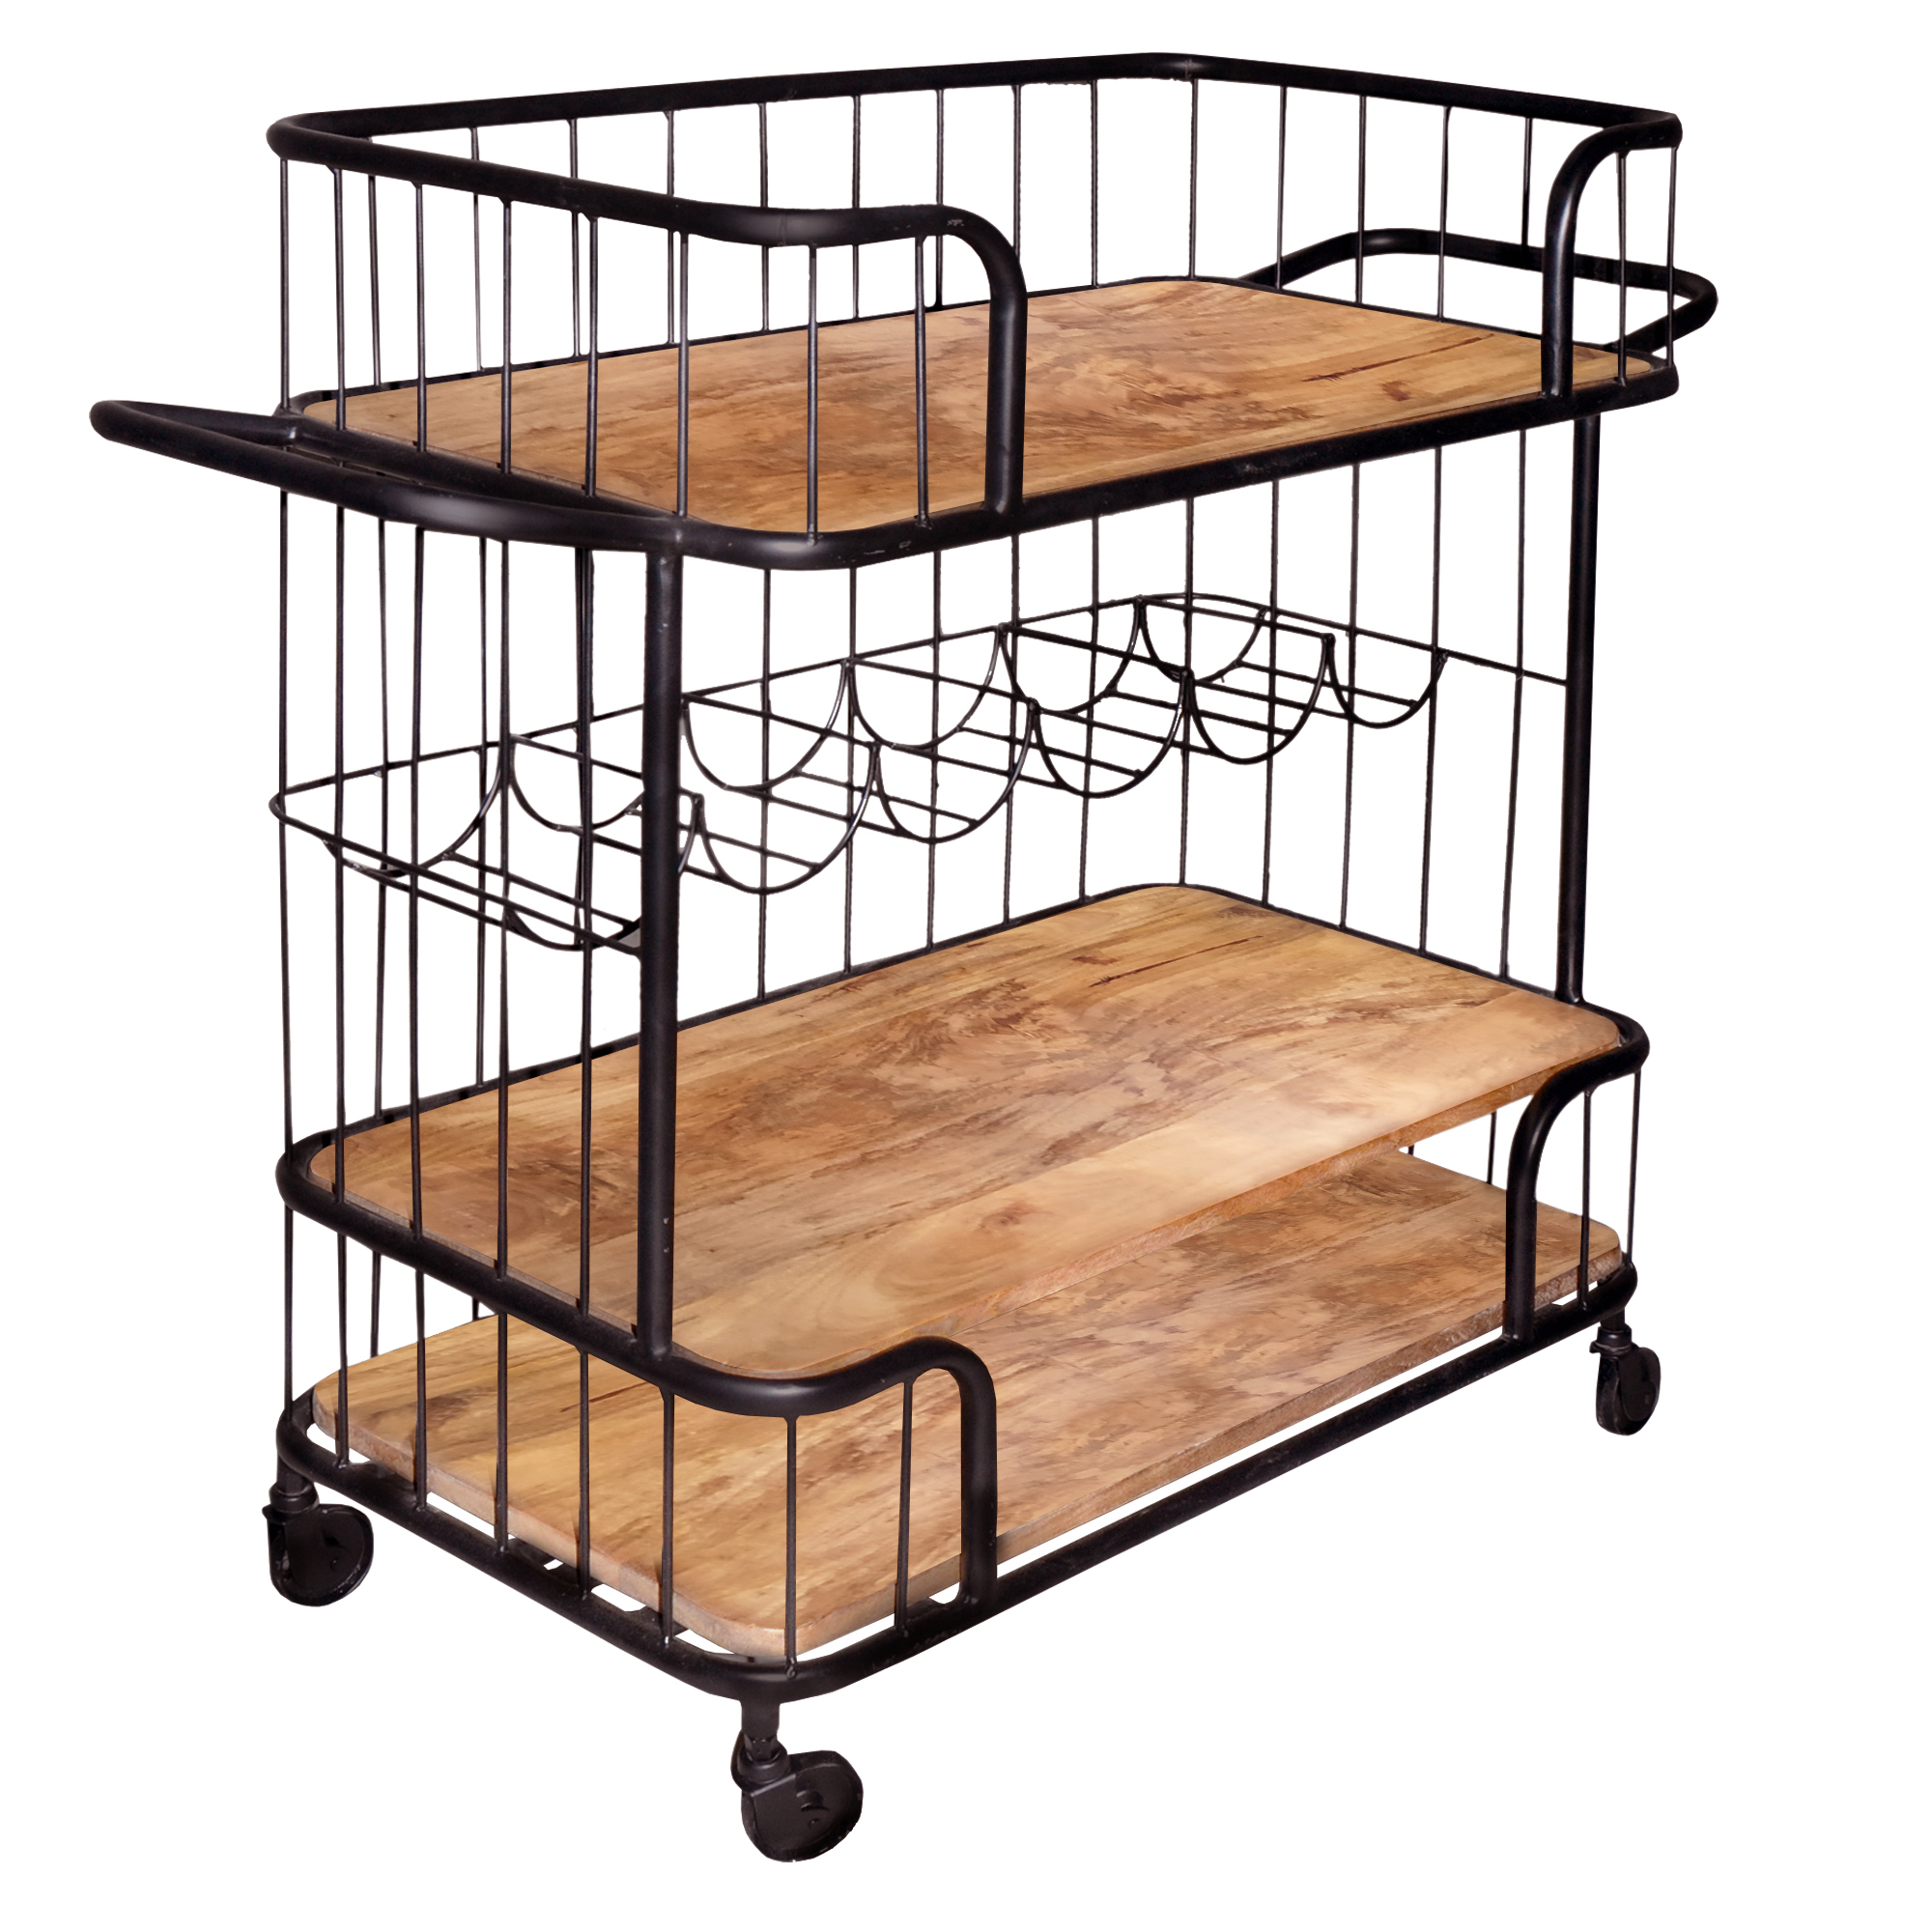 Metal Frame Bar Cart With Wooden Top And 2 Shelves, Black And Brown- Saltoro Sherpi